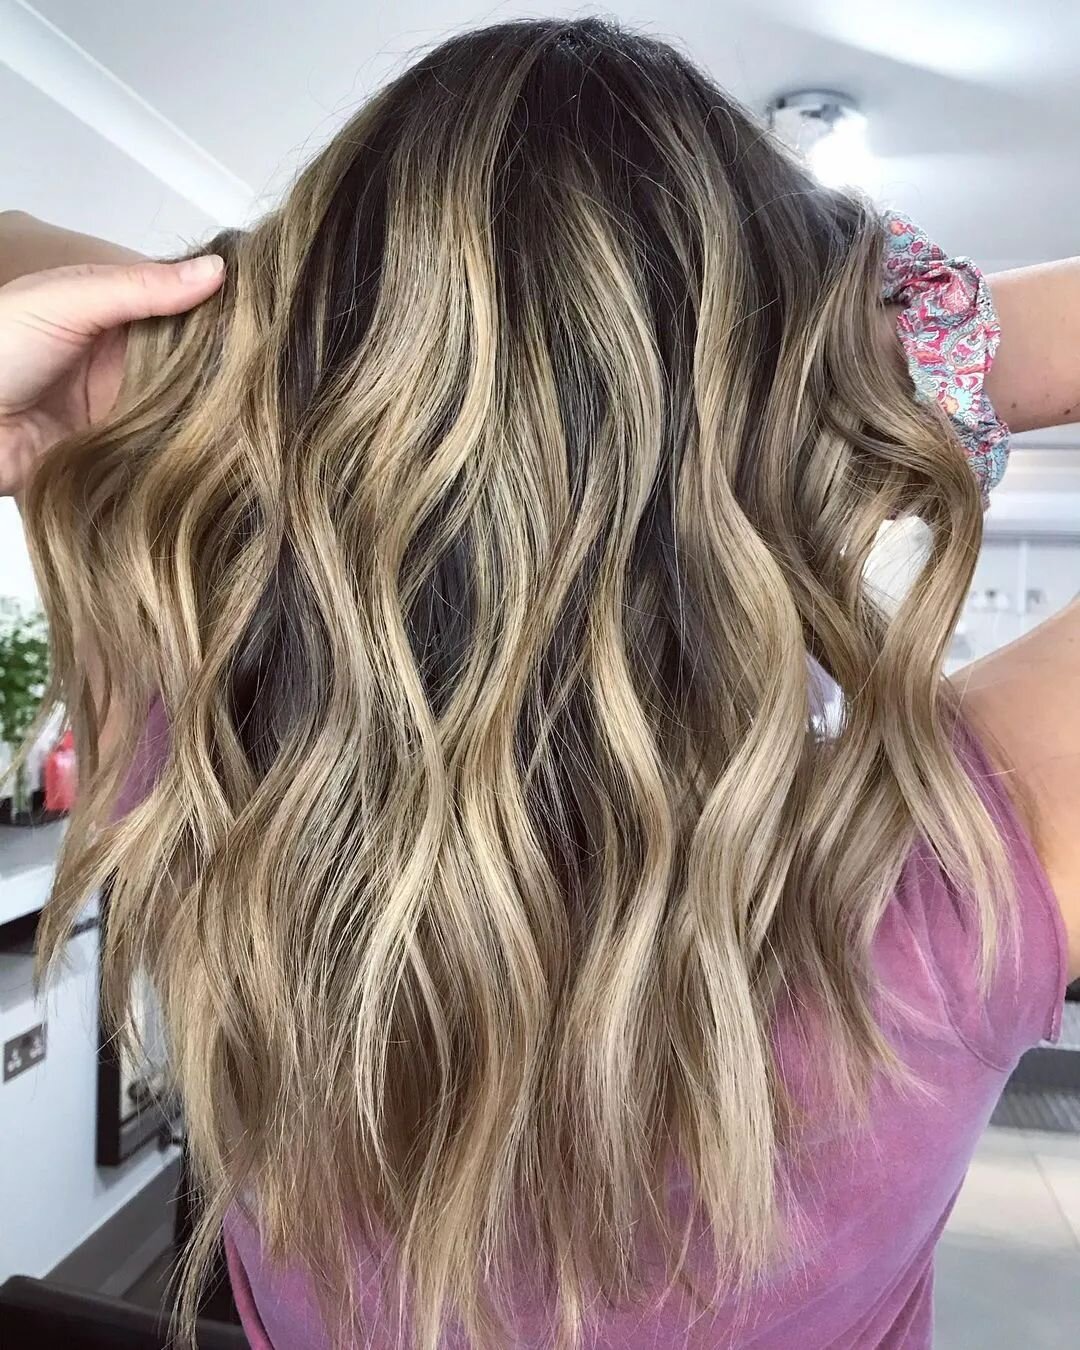 #Repost @chrissieatmanehairsalon with @let.repost 
&bull; &bull; &bull; &bull; &bull; &bull;
A little blonder, a little longer &amp; whole lot more summer ready!☀️

Are you ready to start YOUR hair journey? 😍

Hair by Chrissie

#Balayage #balayagebo